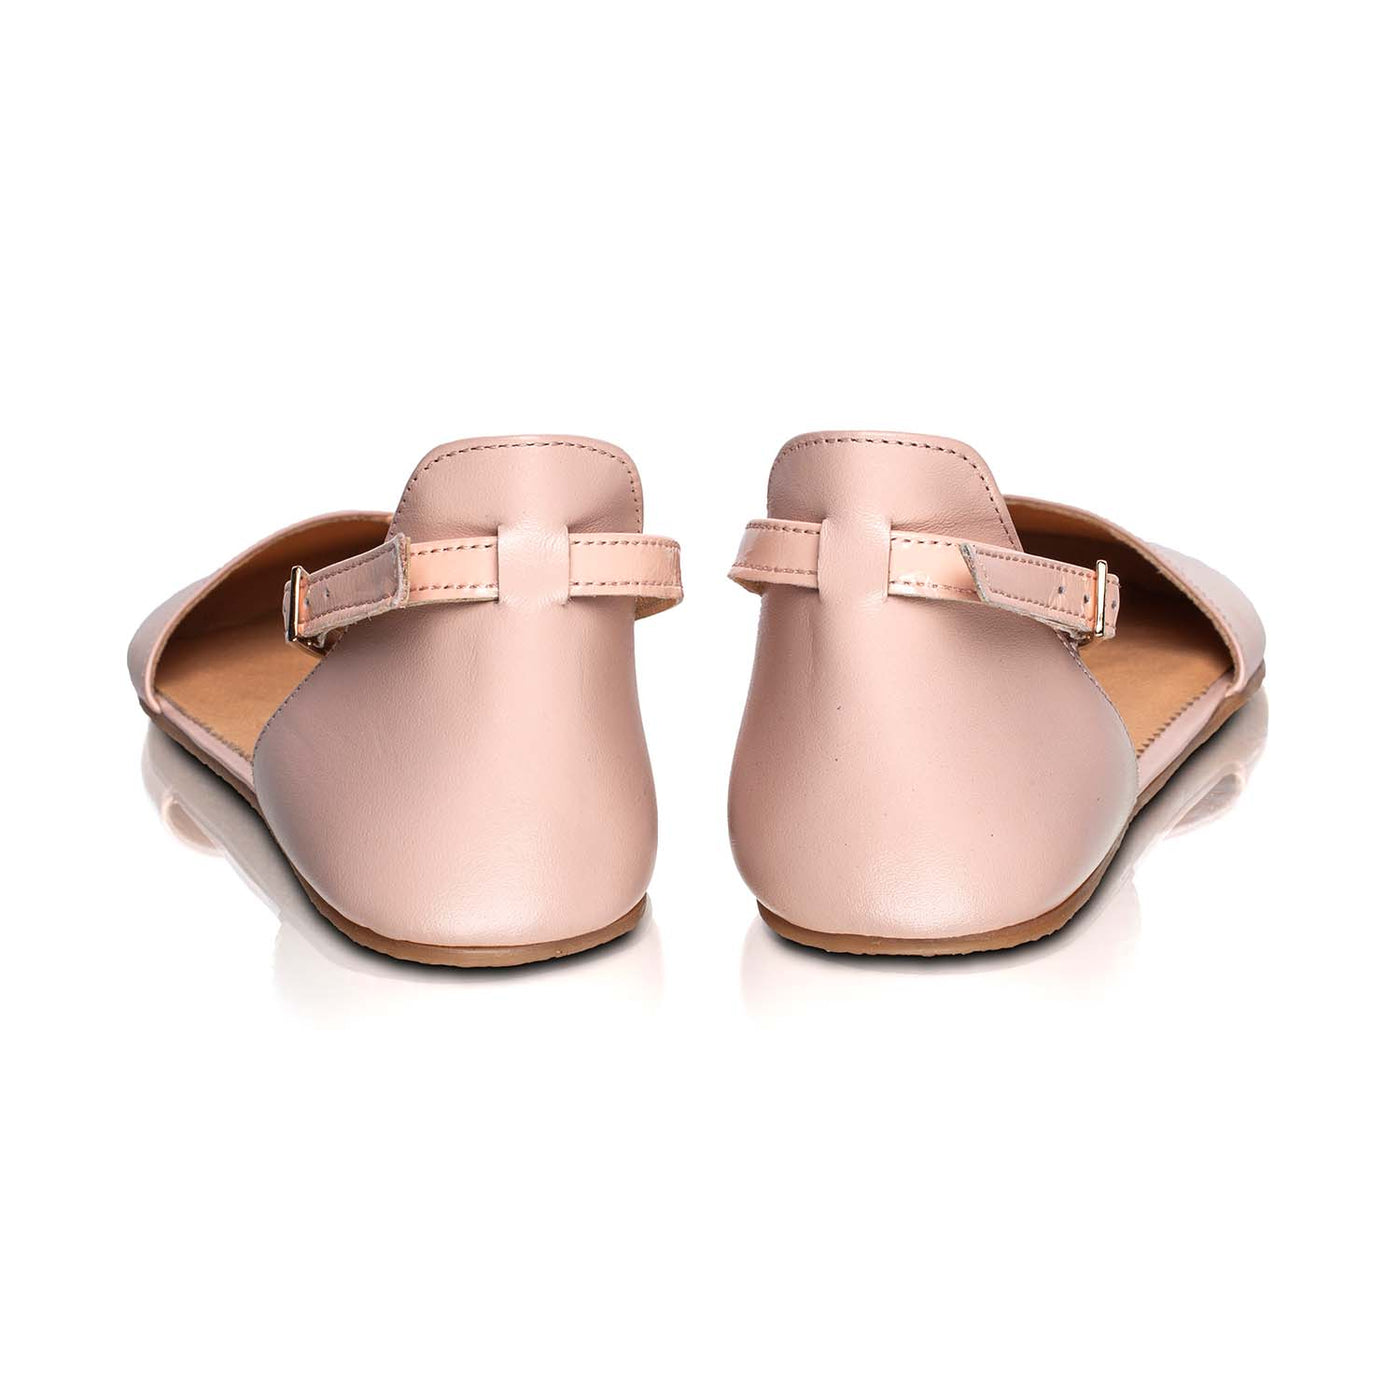 A photo of Shapen Poppy D’orsay dressy flats with a leather upper and rubber soles. The flats are a rose beige color with a heel cup and dainty ankle strap, the inside of the sole are a beige color. Both flats are shown from the back against a white background. #color_rose